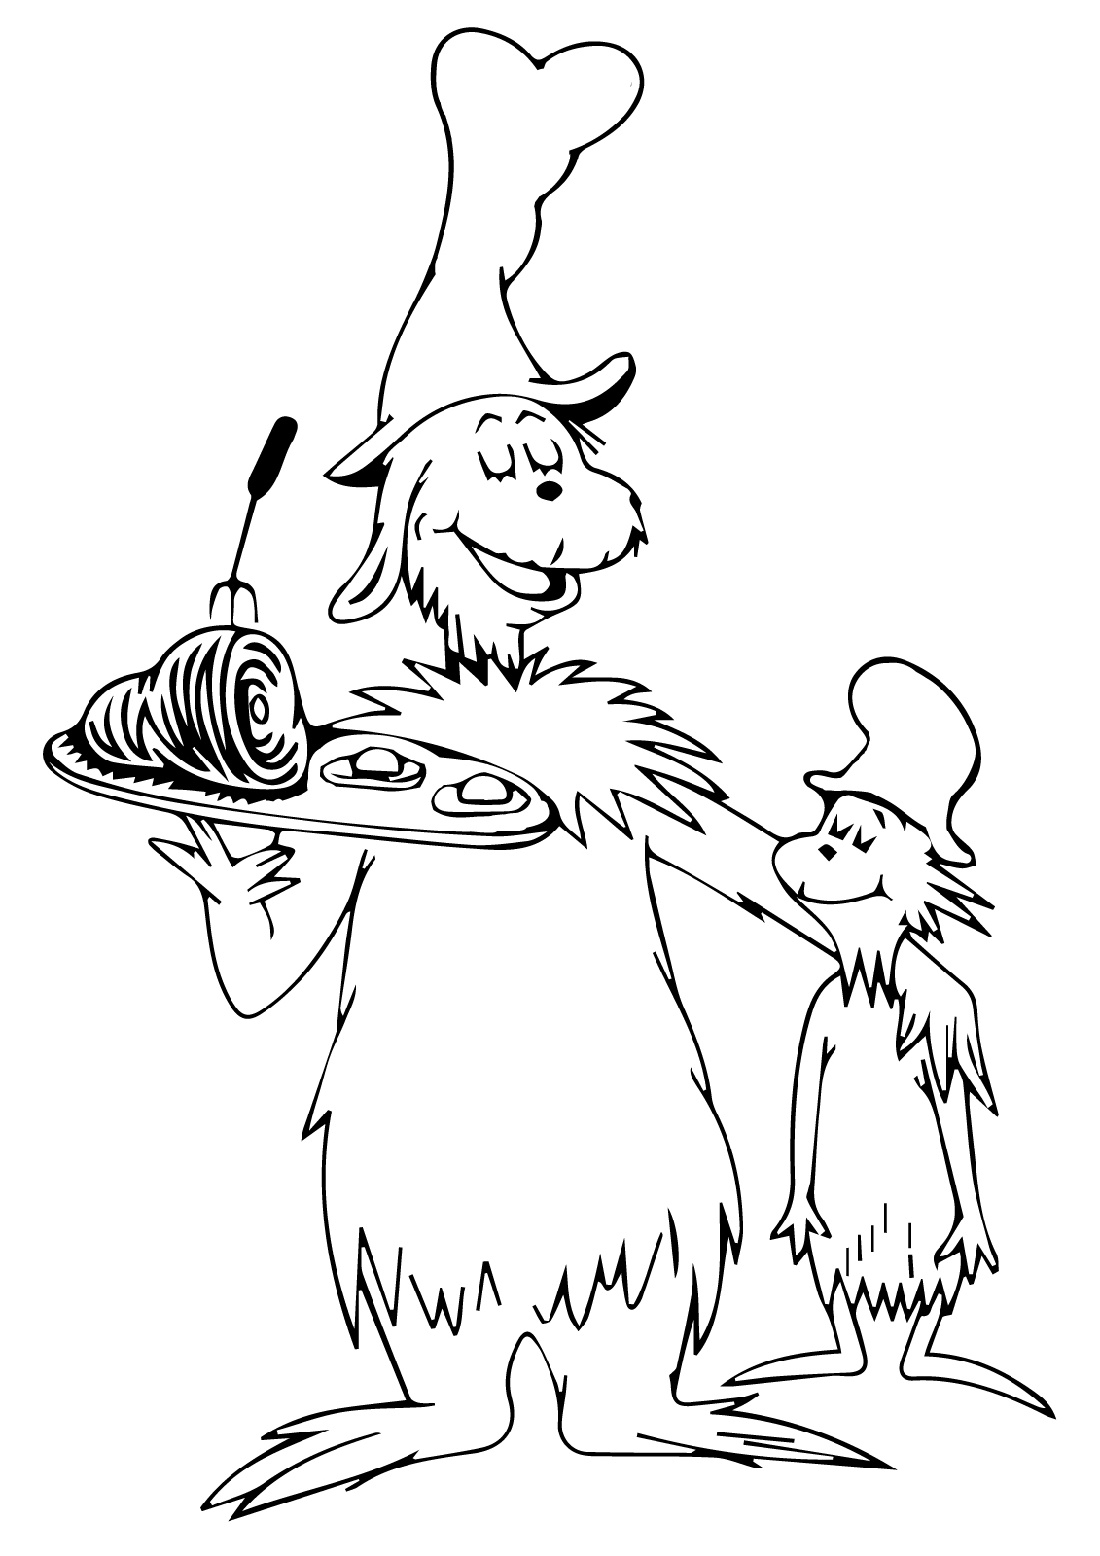 green eggs and ham coloring pages green eggs and ham coloring page new dr seuss coloring eggs green pages and ham coloring